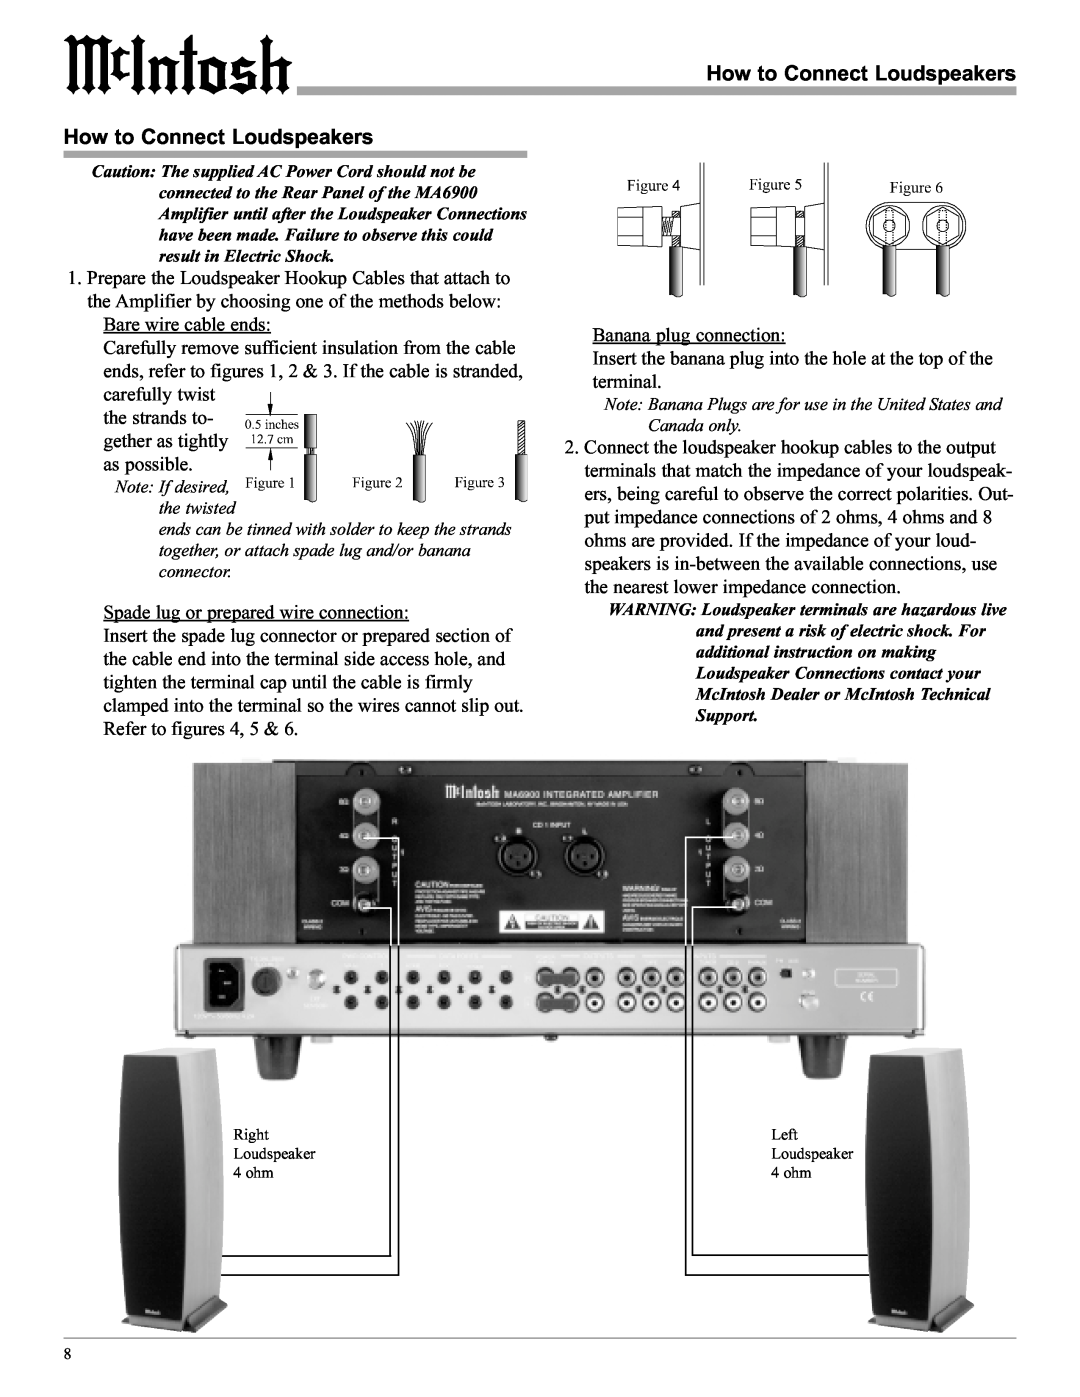 McIntosh MA6900 manual How to Connect Loudspeakers, Bare wire cable ends, Spade lug or prepared wire connection 